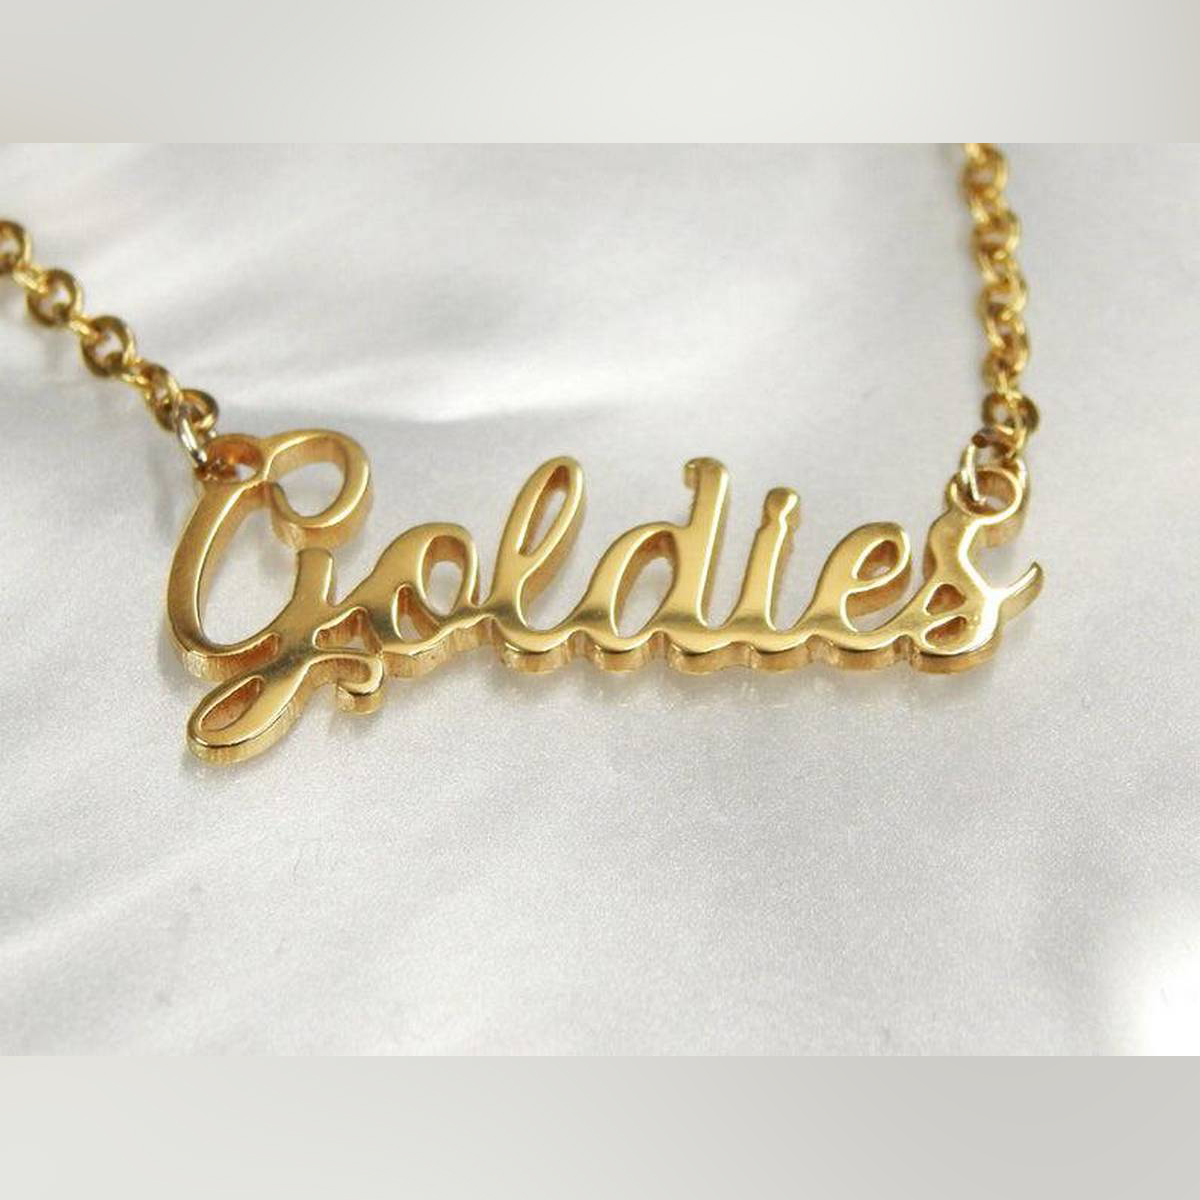 Name Locket Gold Plated Custom Made Simple Design Single Personalized Name 18k Gold Plated Any Name Gift Necklace For Men Women Name Locket Buy Online Name Locket Buy Online Pakistan Name Locket Designs Online Buy Online At Best Prices